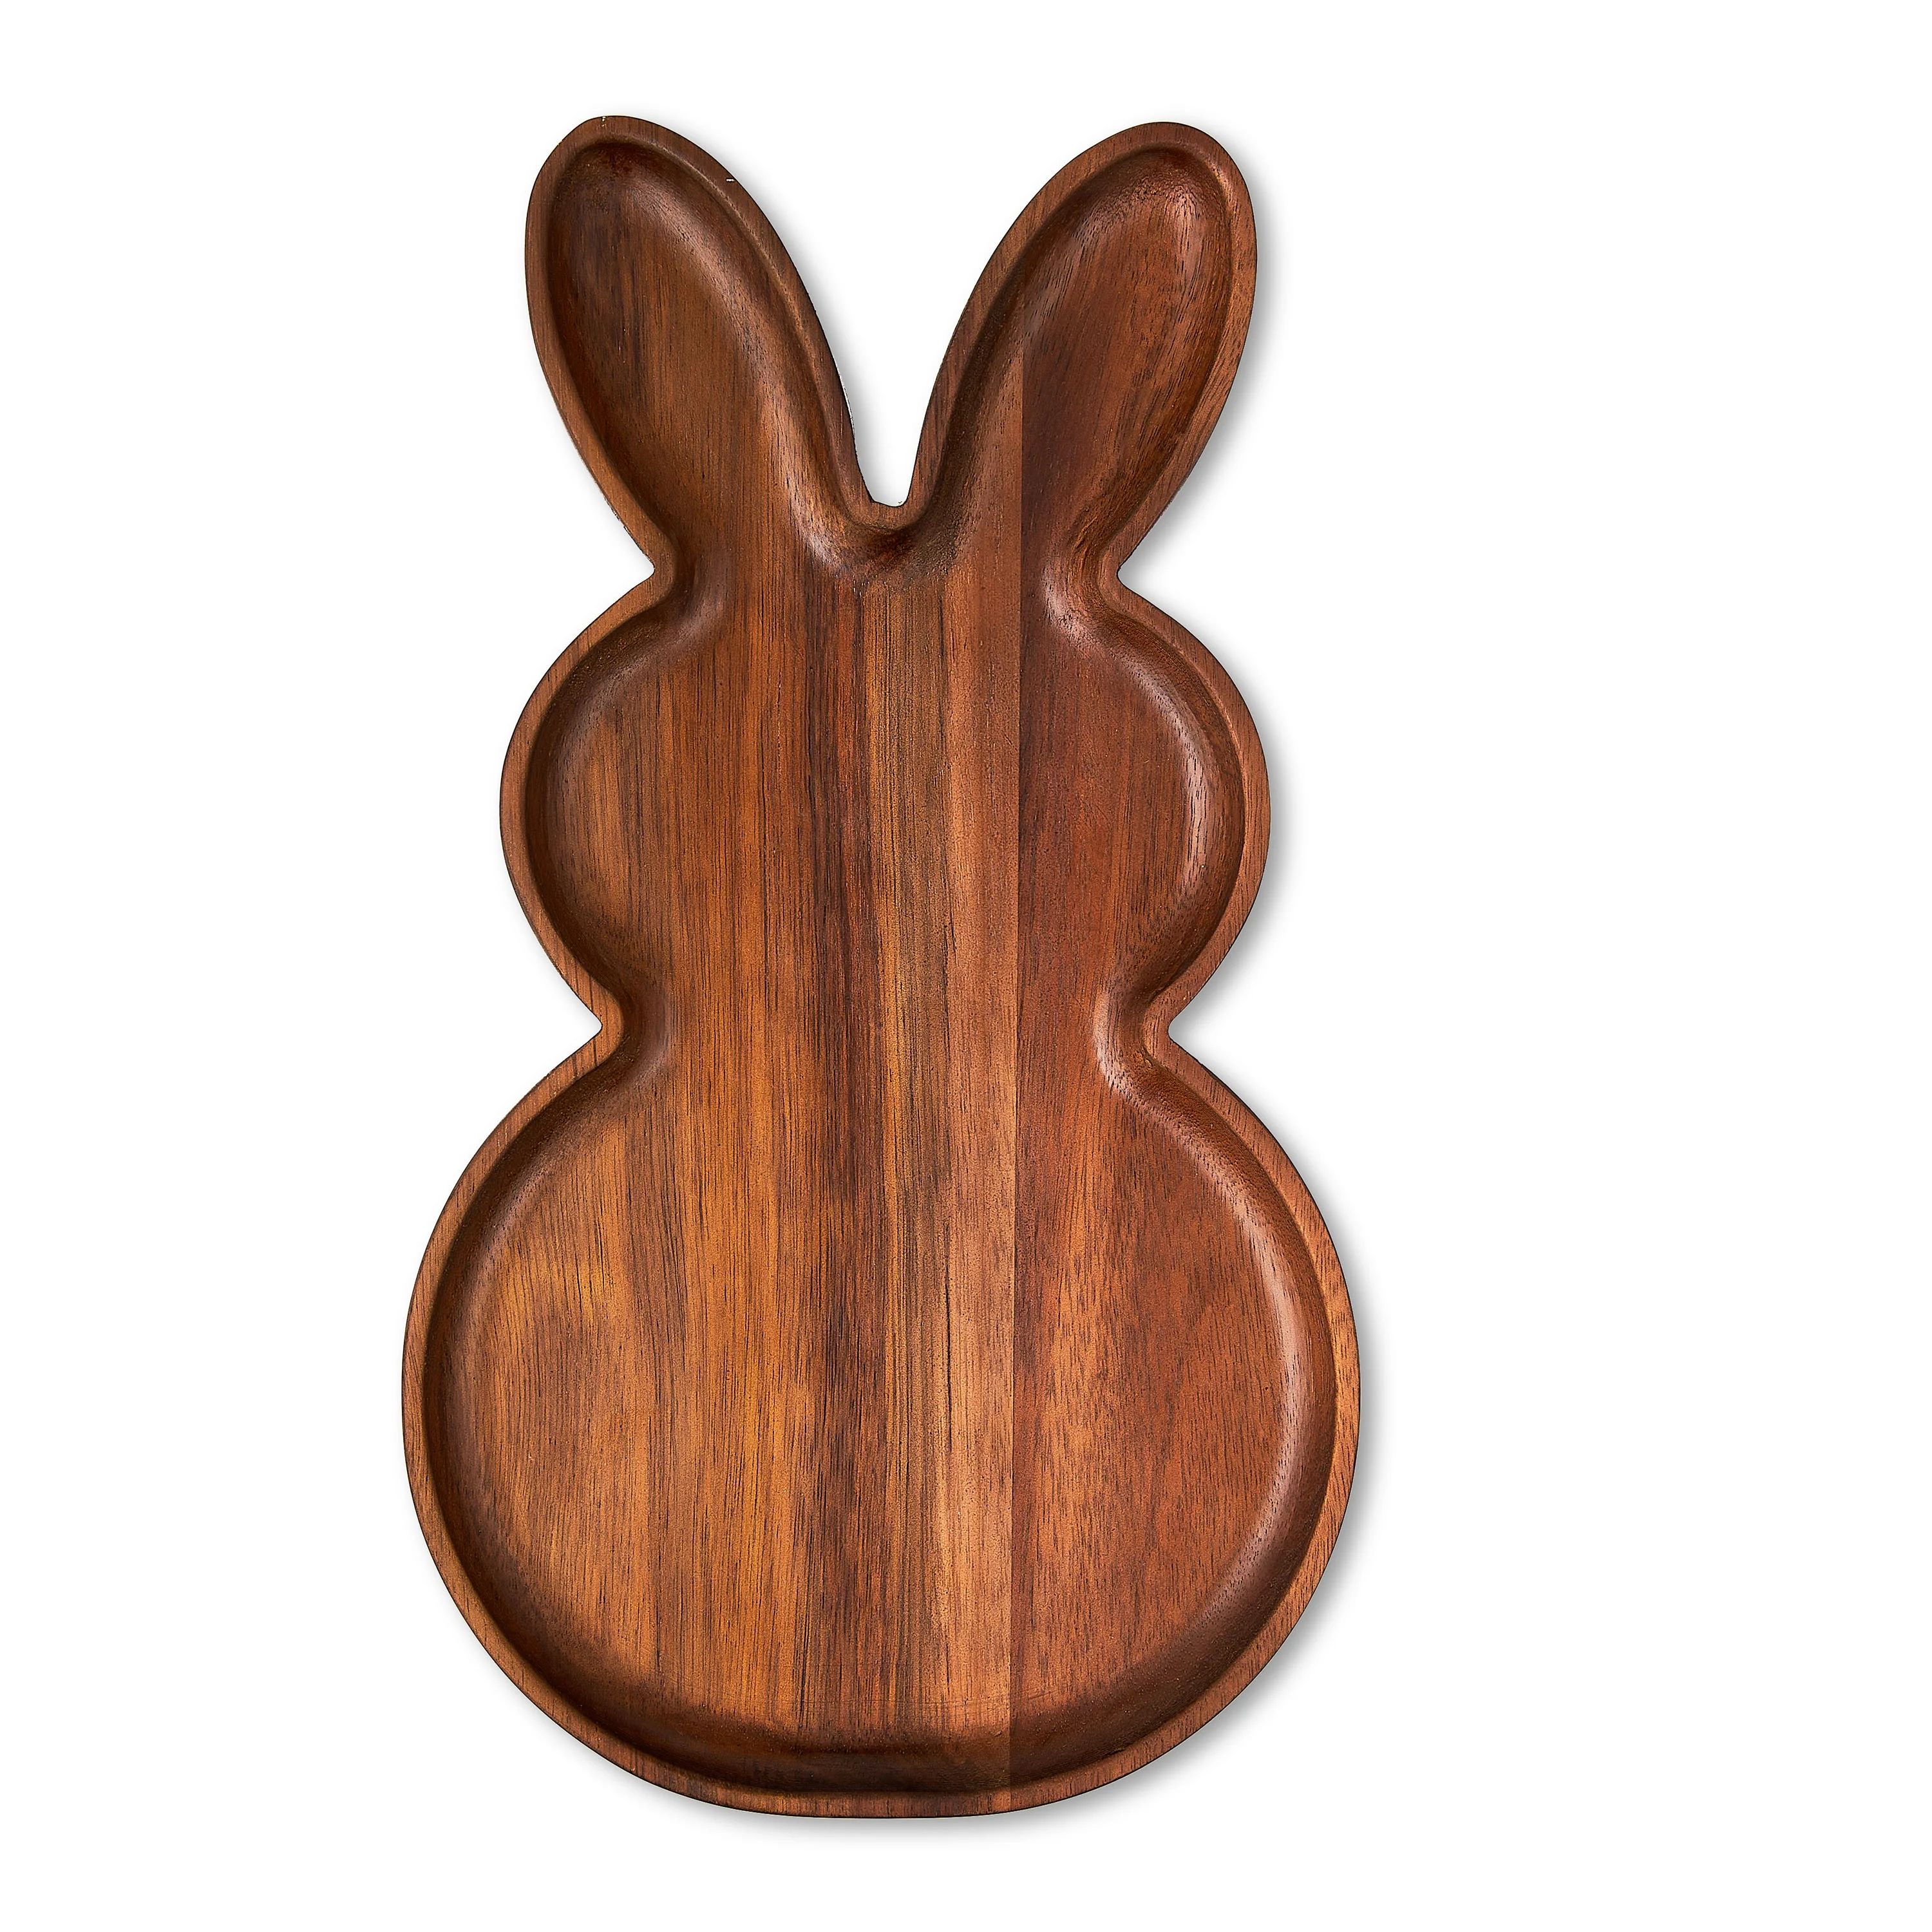 Easter Decorative Wooden Bunny Tray, 12 in x 6 in, by Way To Celebrate | Walmart (US)